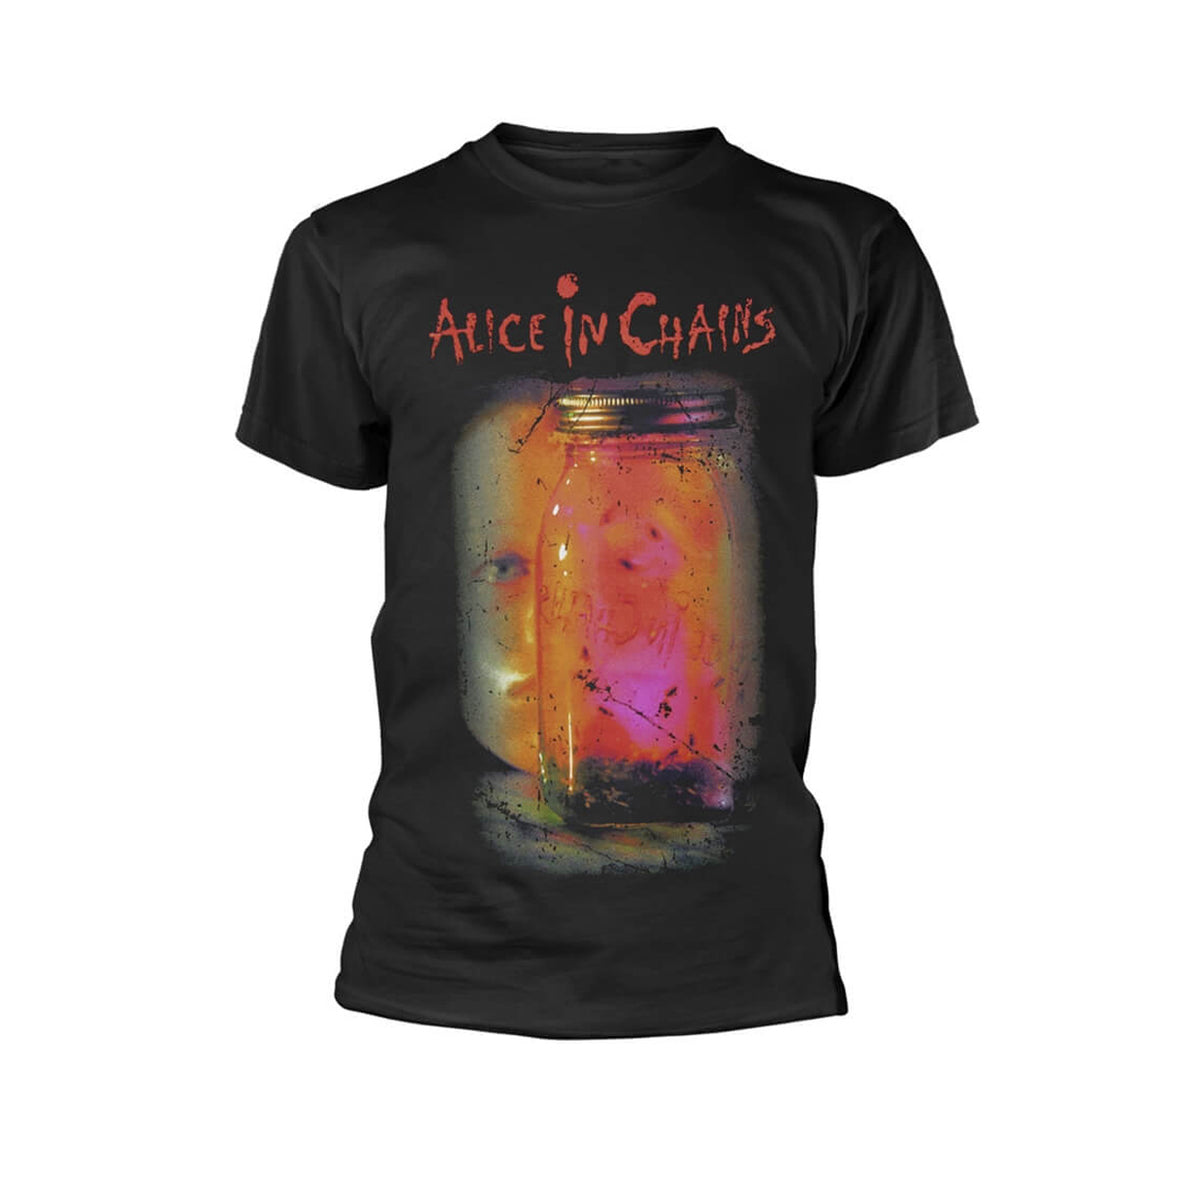 Vinyl - Alice in Chains : Jar of Flies - T-Shirt - The Record Hub